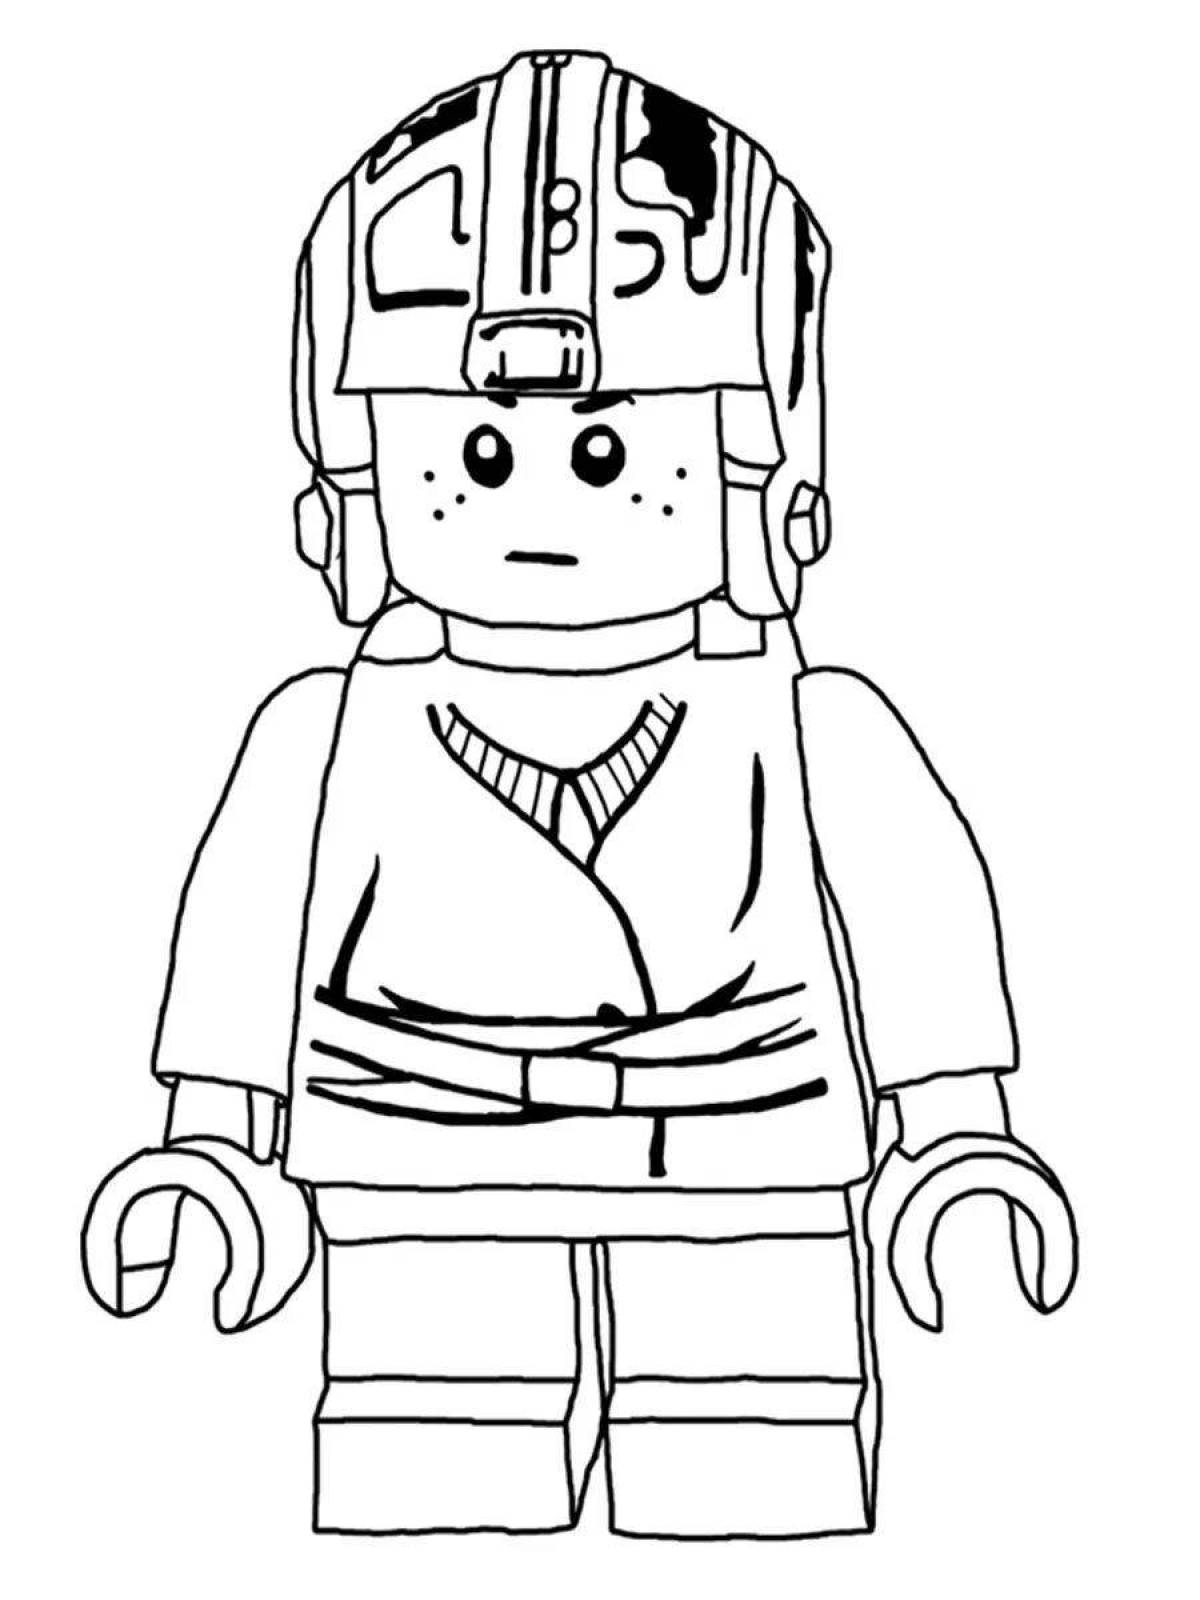 Exquisite lego star wars coloring book